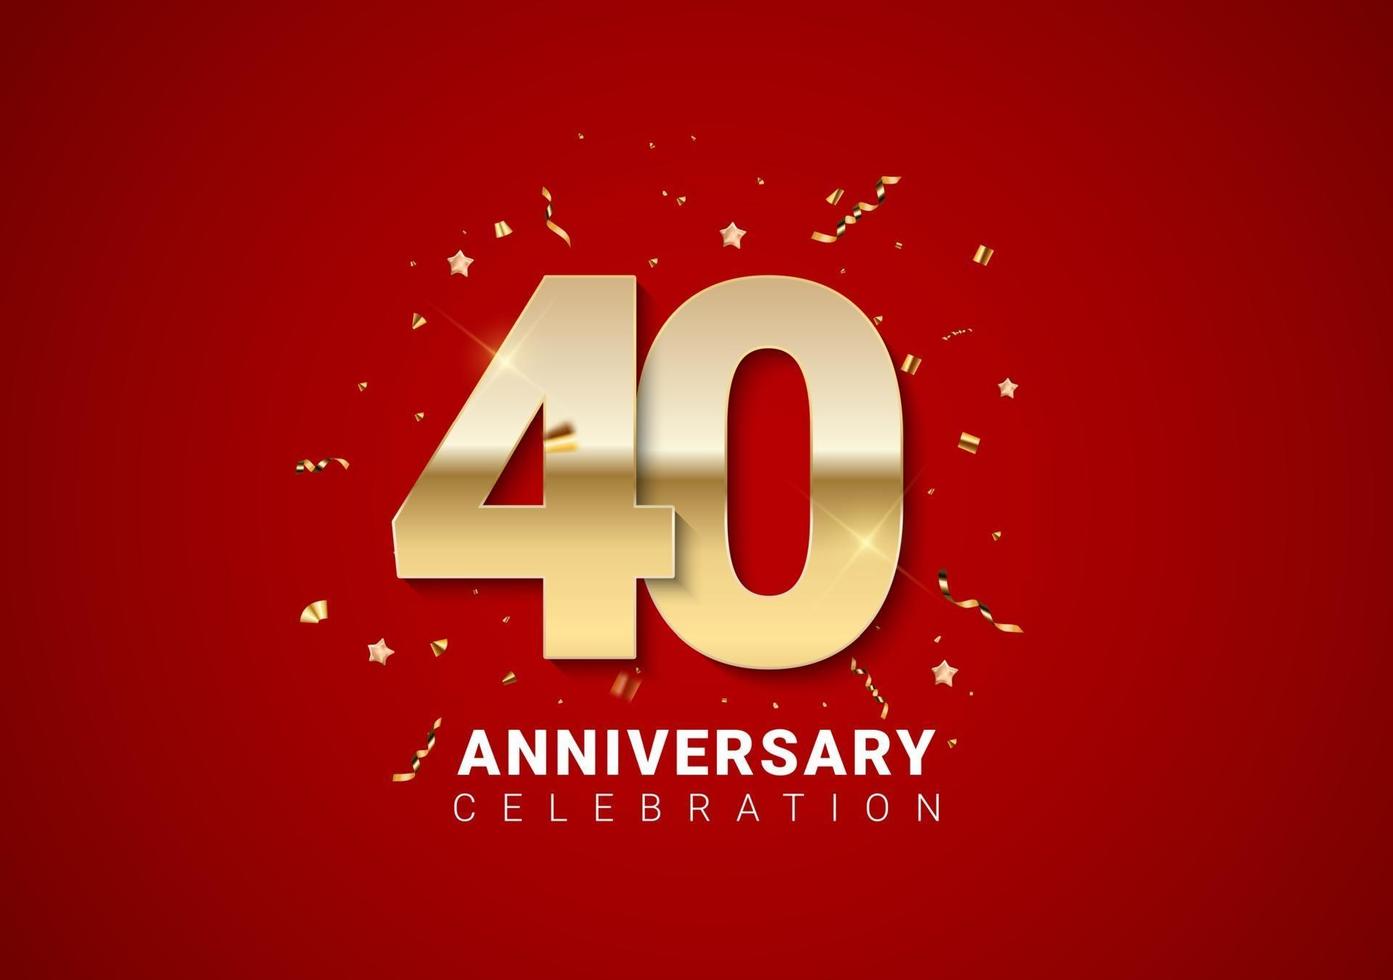 40 anniversary background with golden numbers, confetti, stars vector